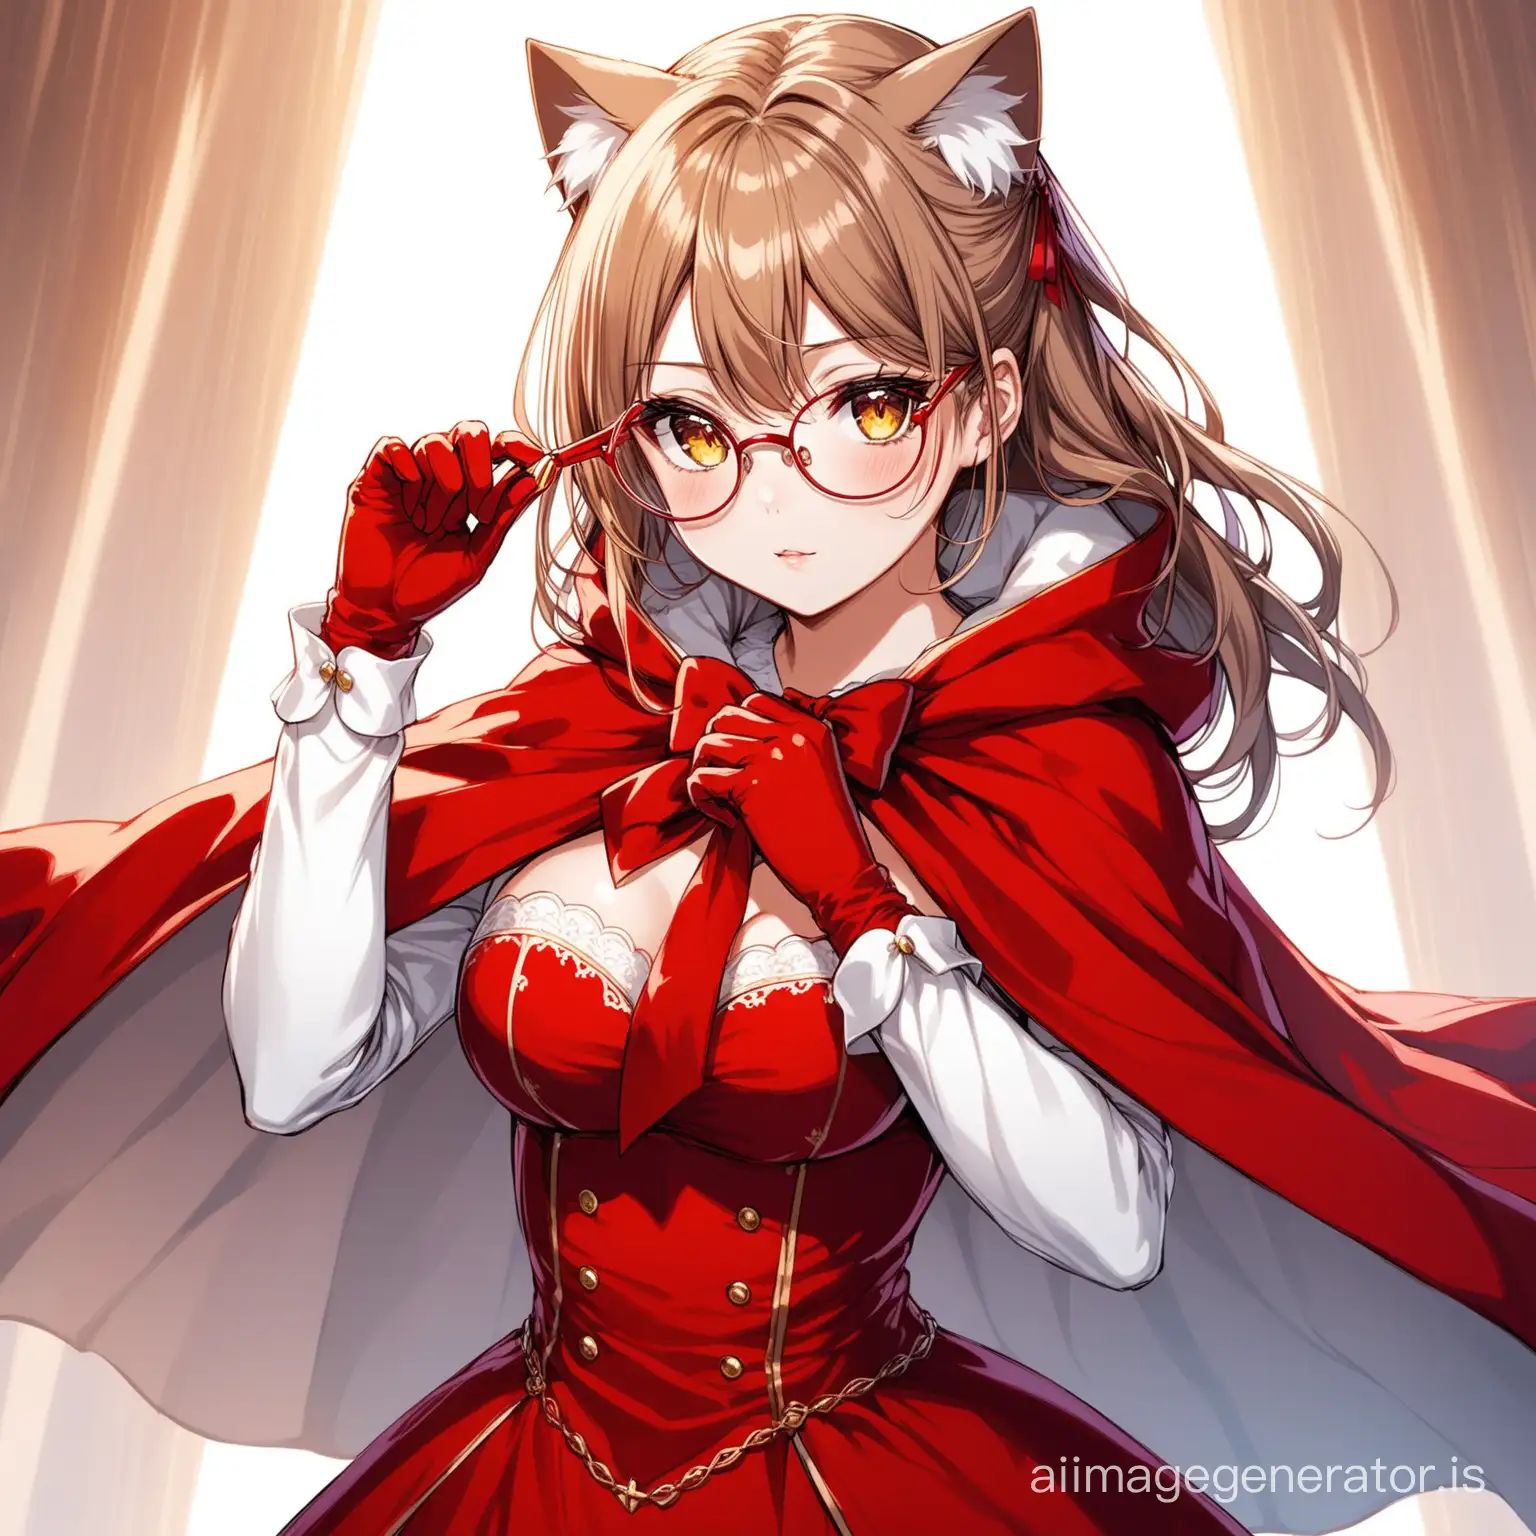 Elegant-Anime-Girl-in-Stylish-Dress-with-Red-Gloves-and-Cat-Eye-Spectacles